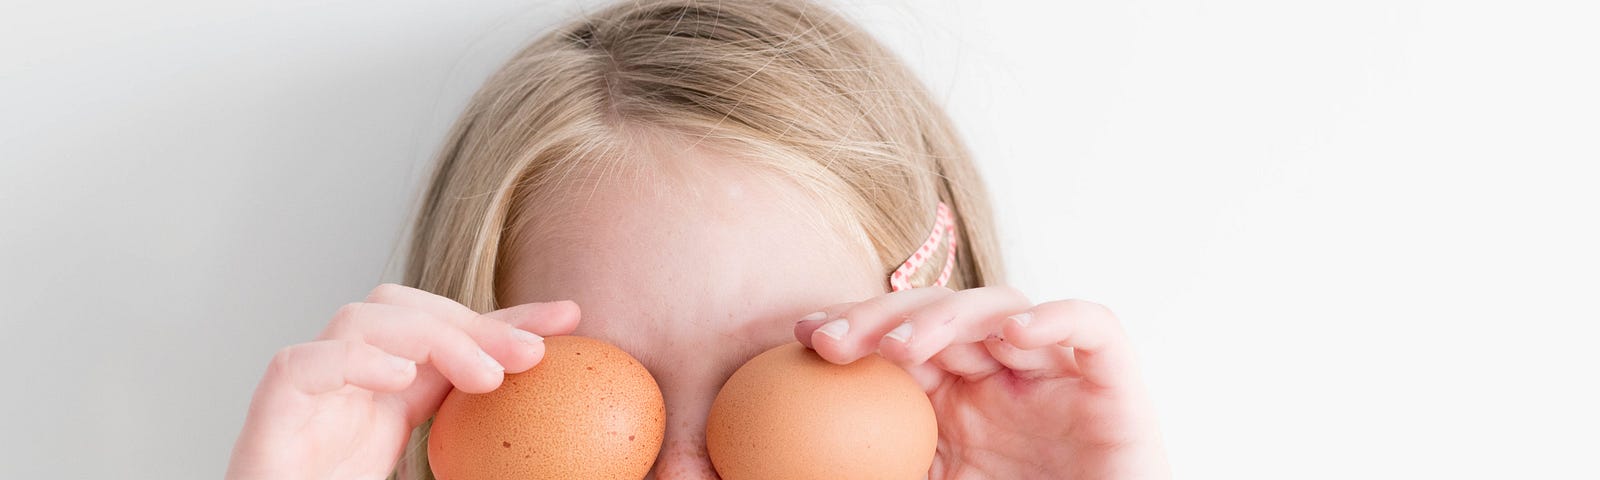 A girl holding two eggs up in front of her eyes